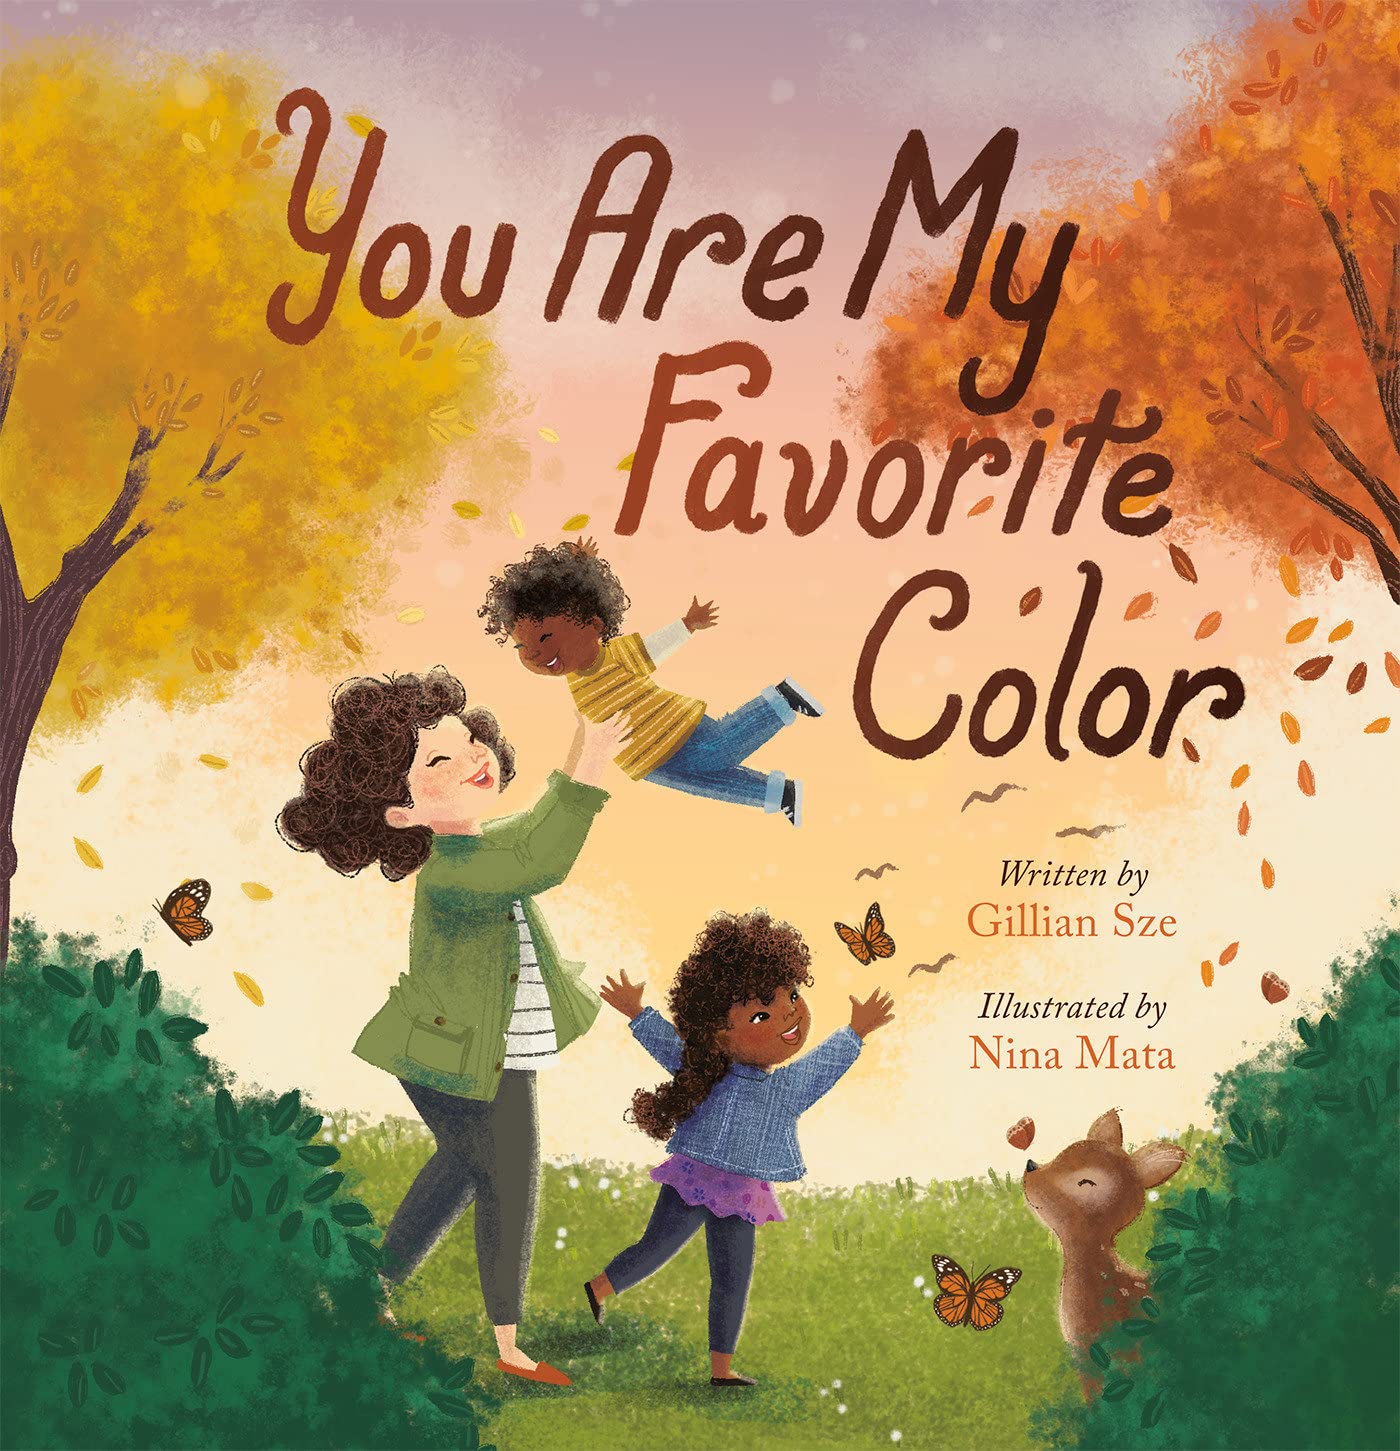 You are My Favorite Color, by Gillian Sze